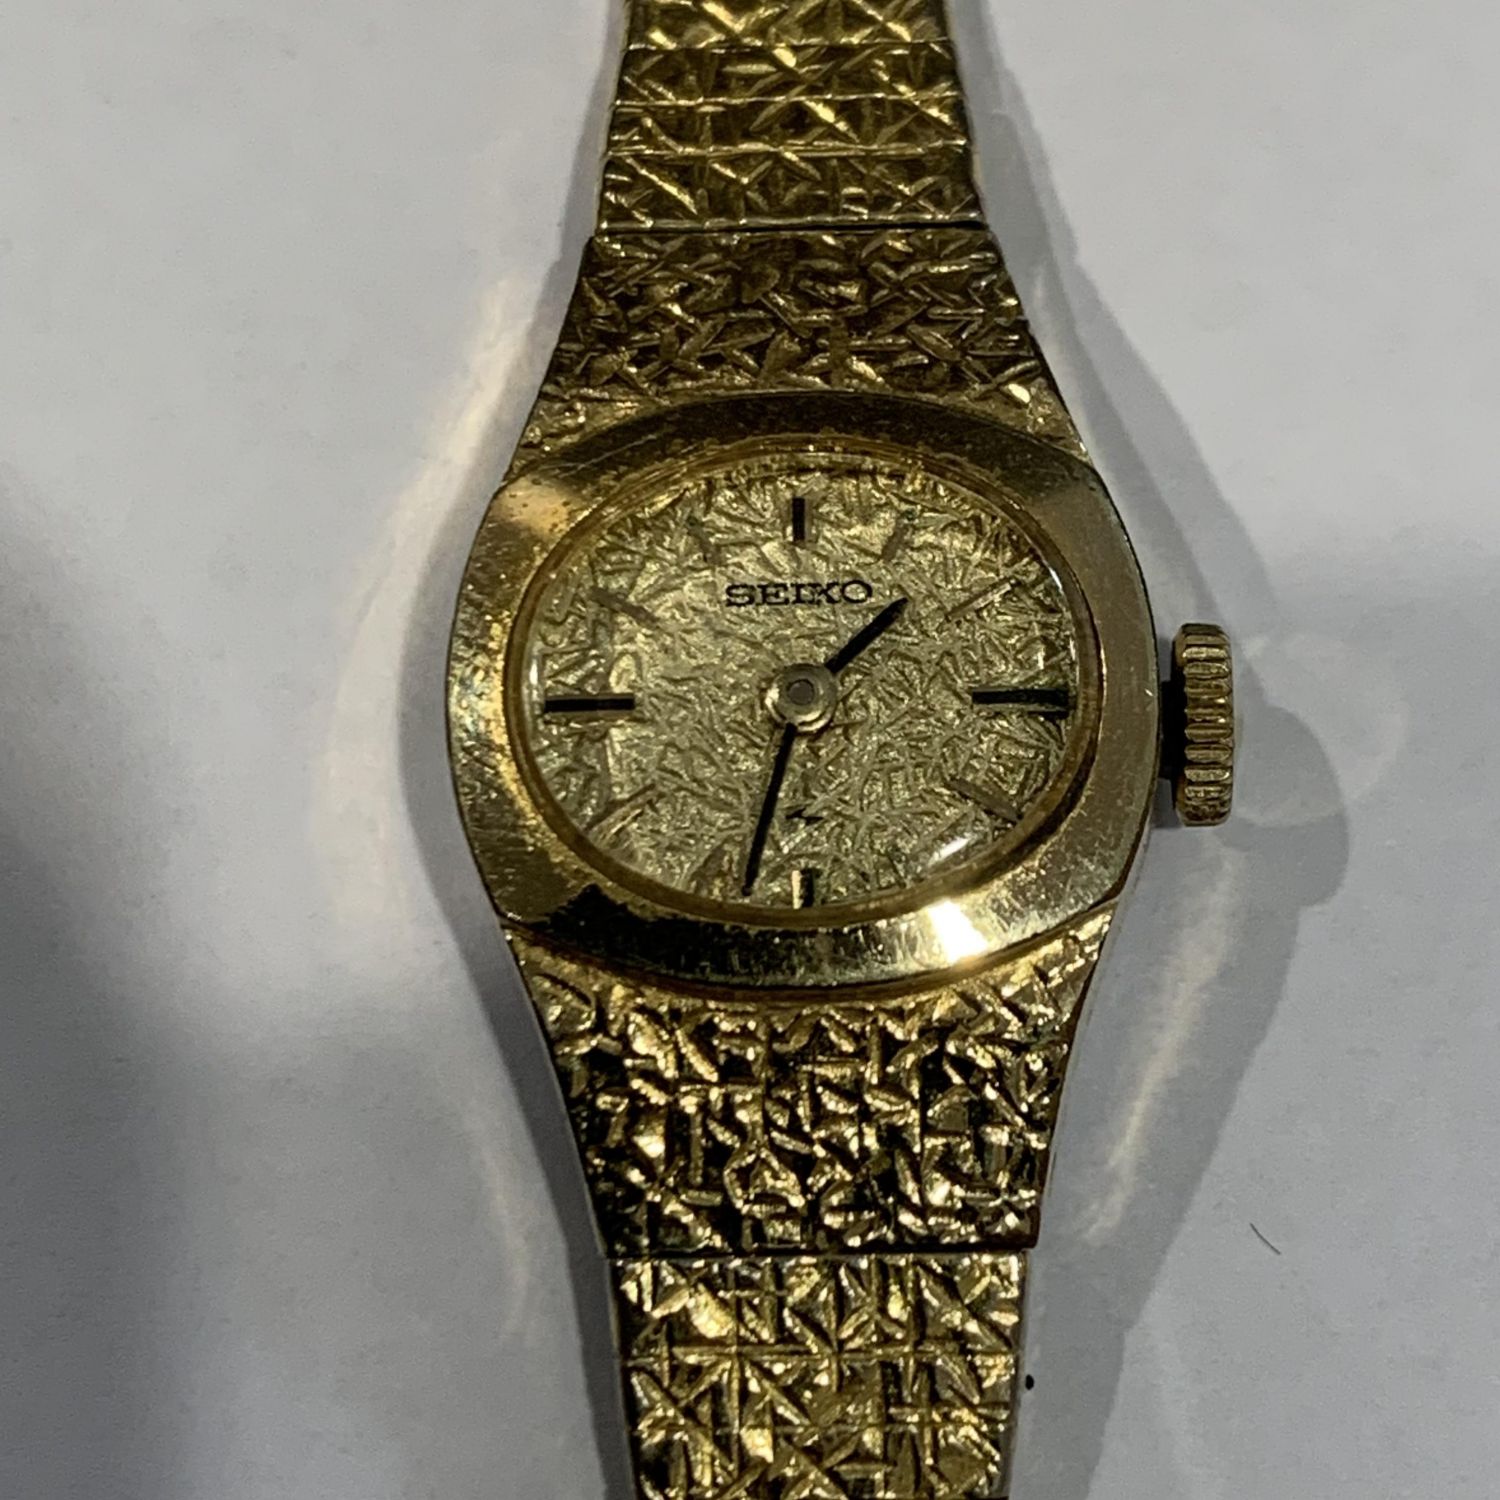 20th Century Seiko Ladies Watch - Watches - Hemswell Antique Centres